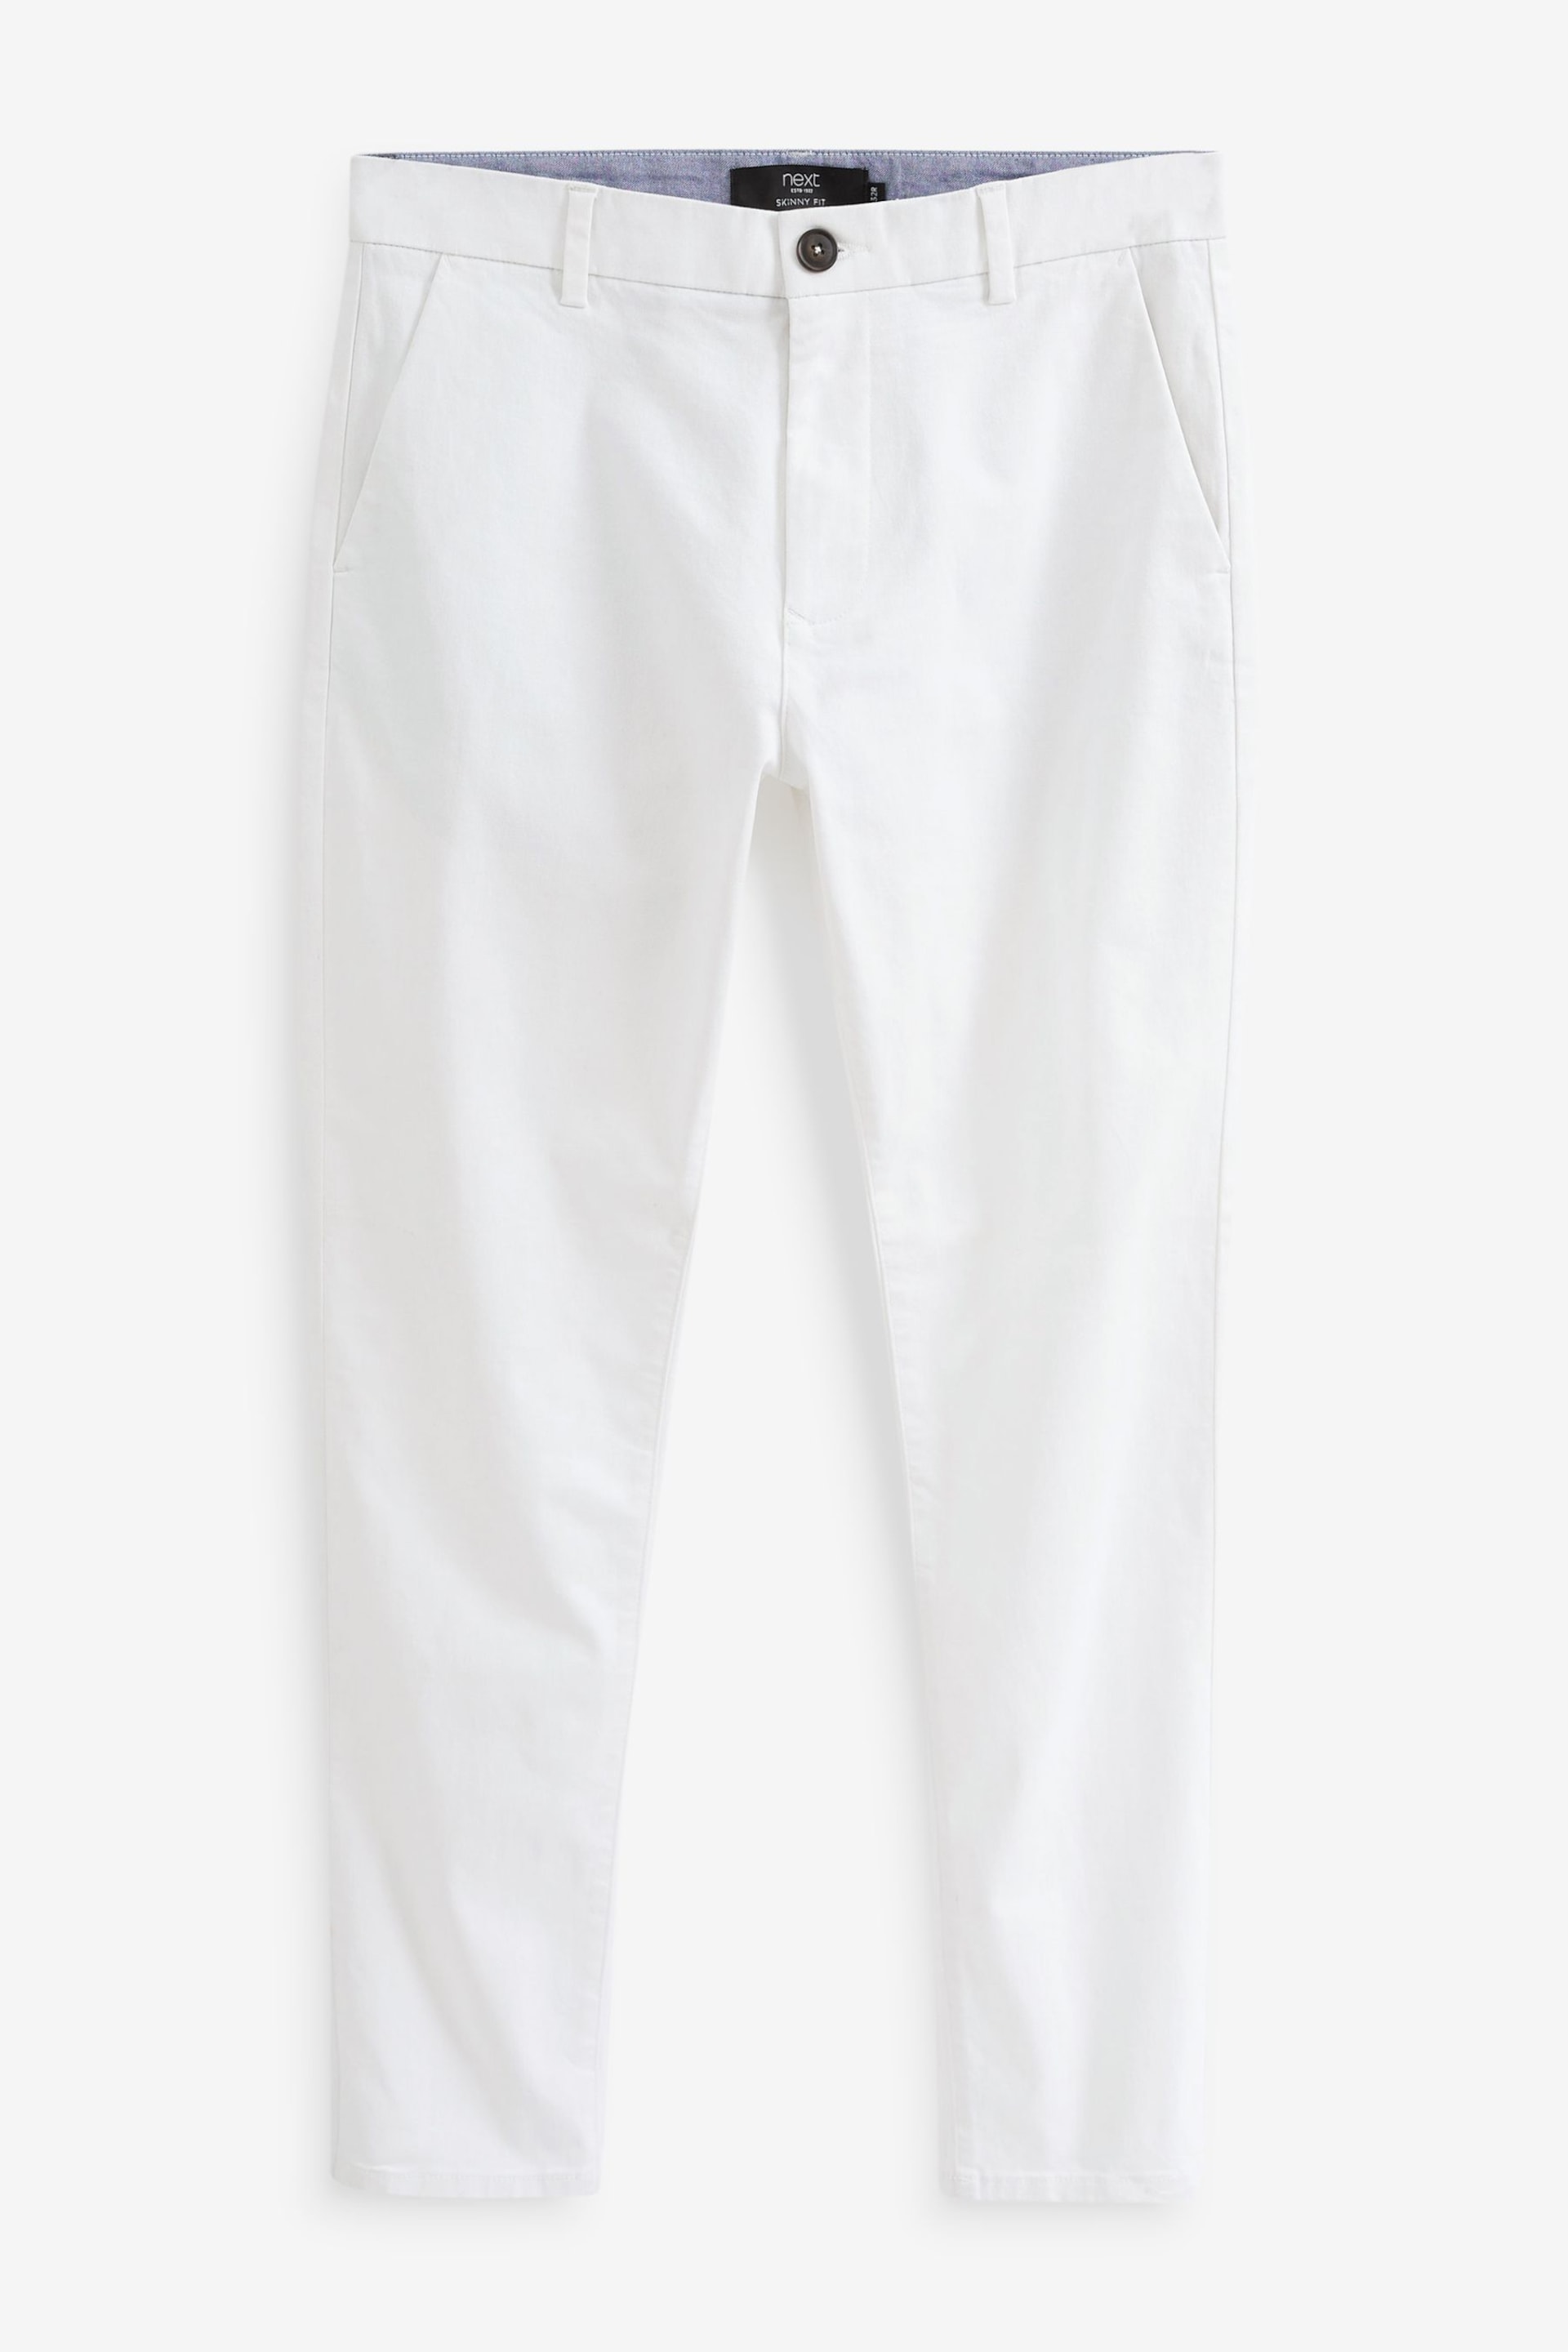 White Skinny Fit Stretch Chino Trousers - Image 5 of 6